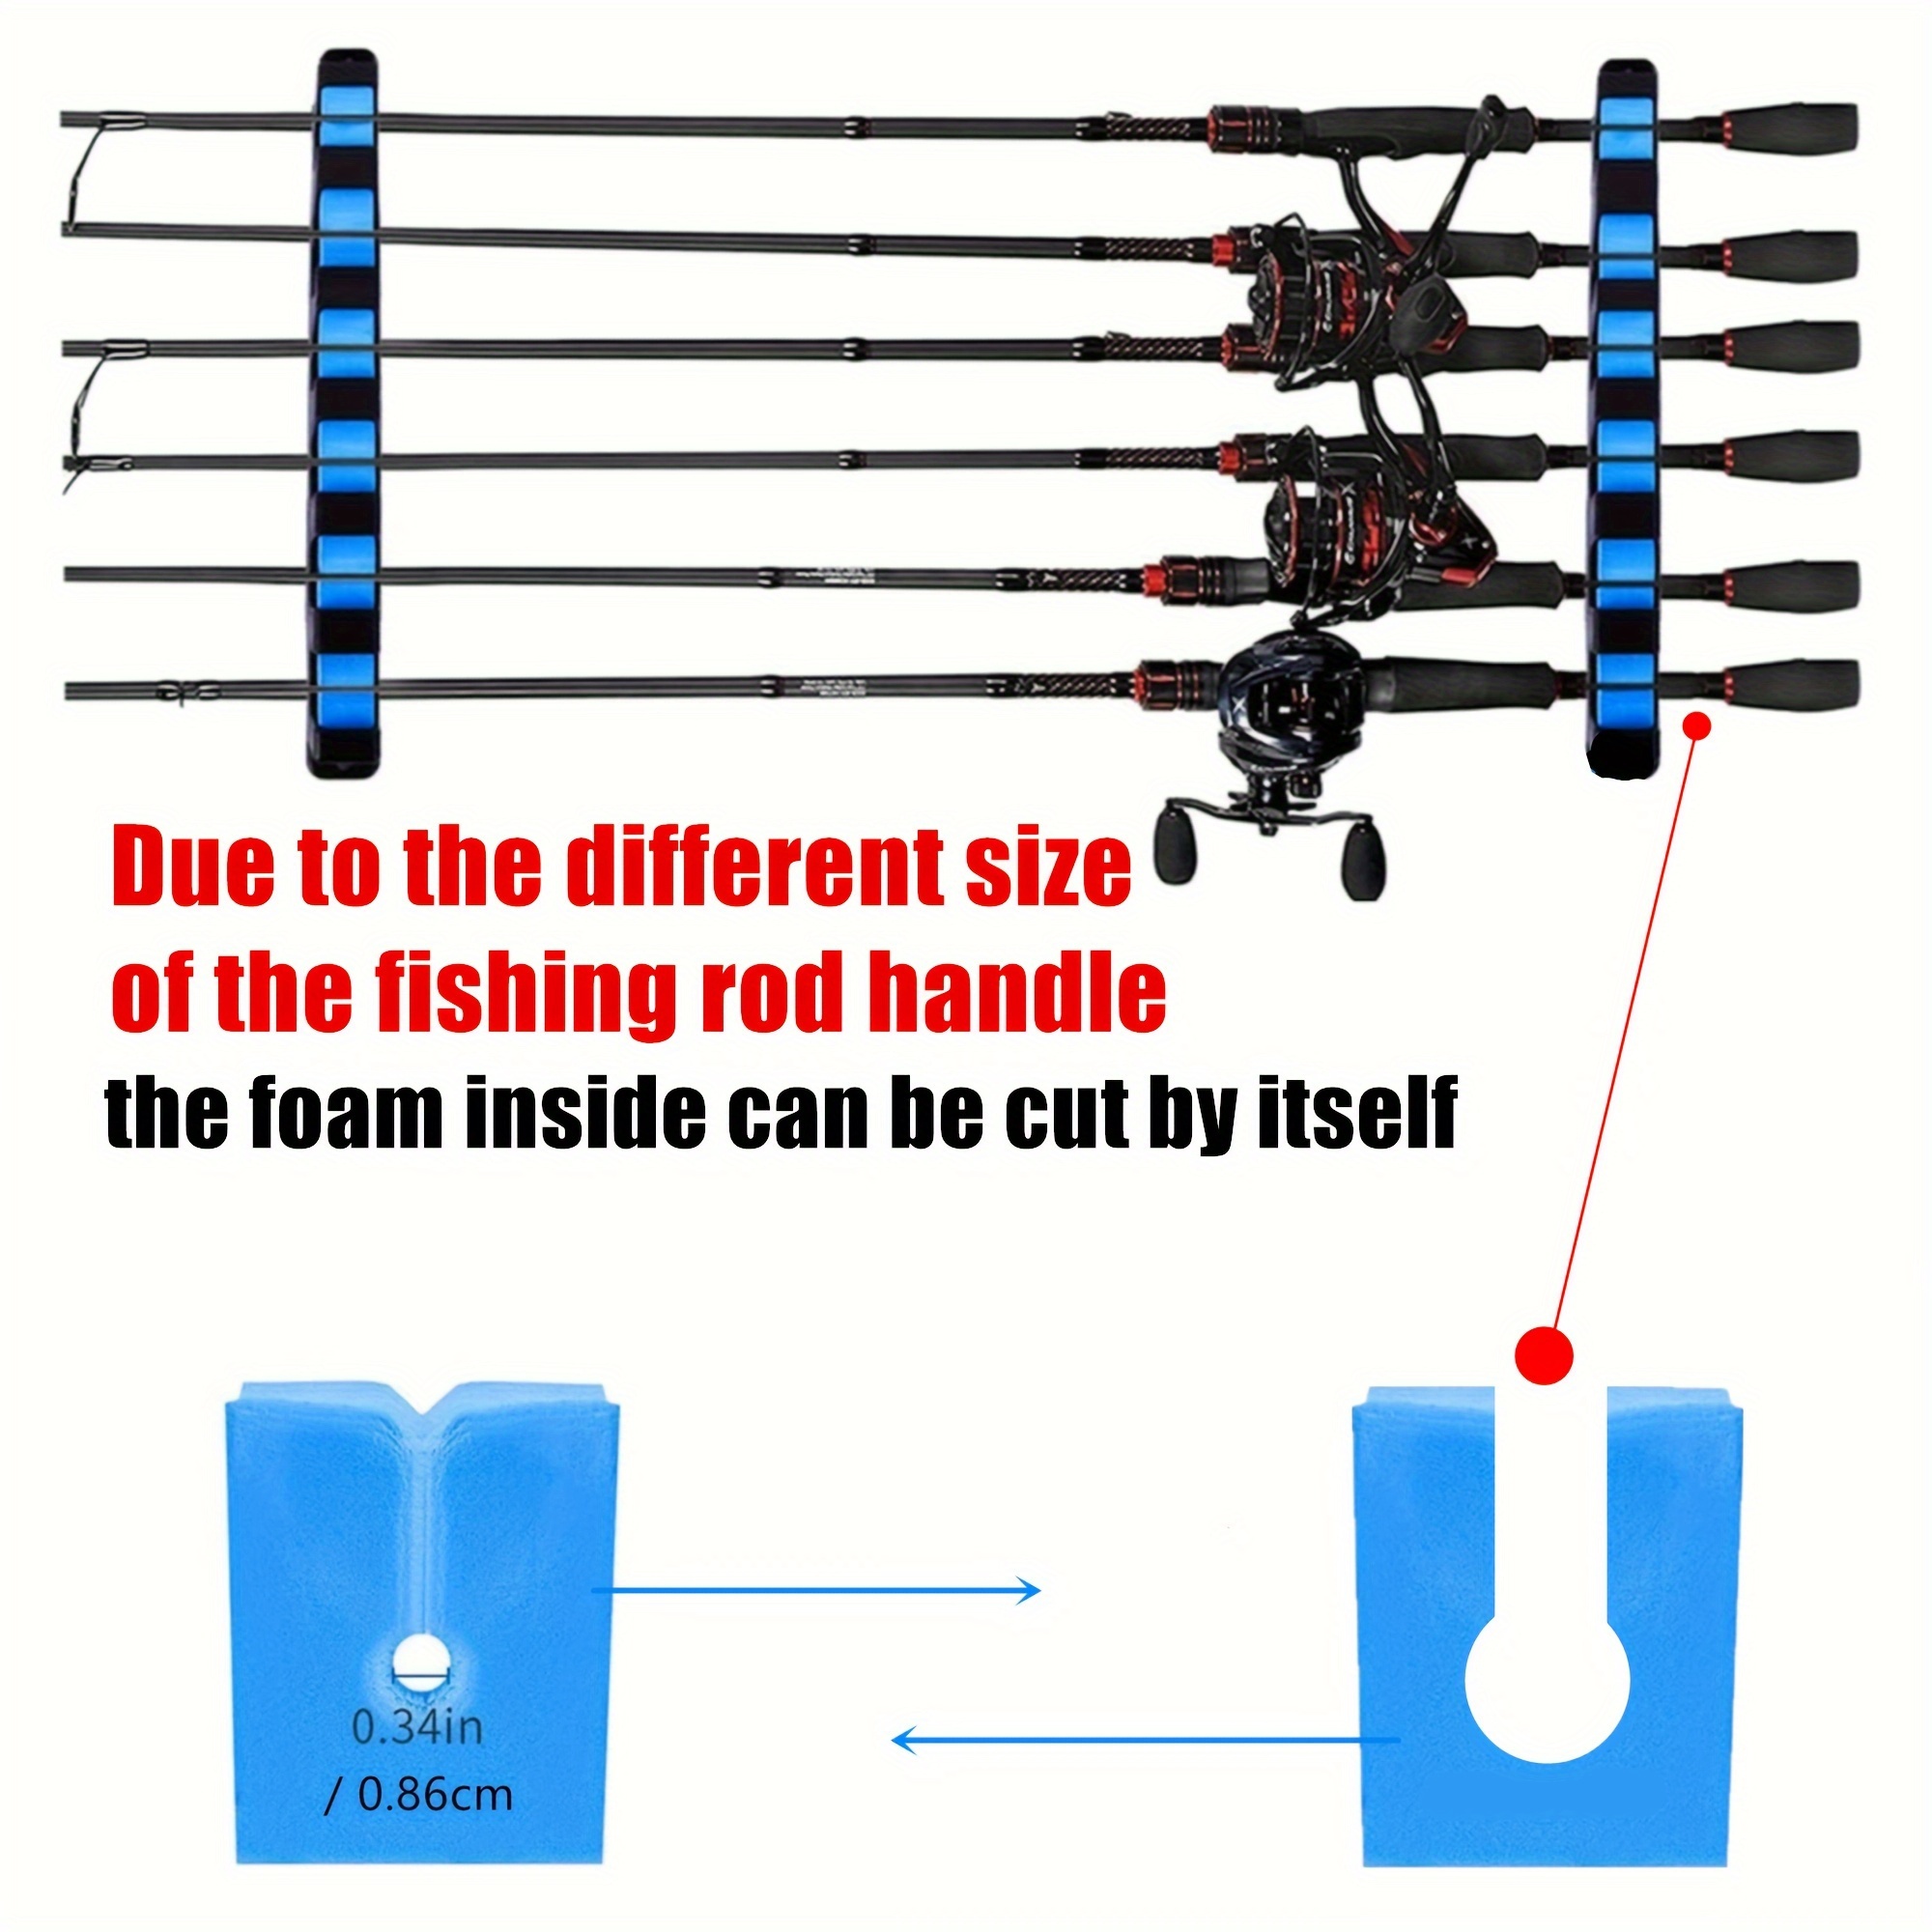 Fishing pole mount ideas? Anyone ever mounted poles to their